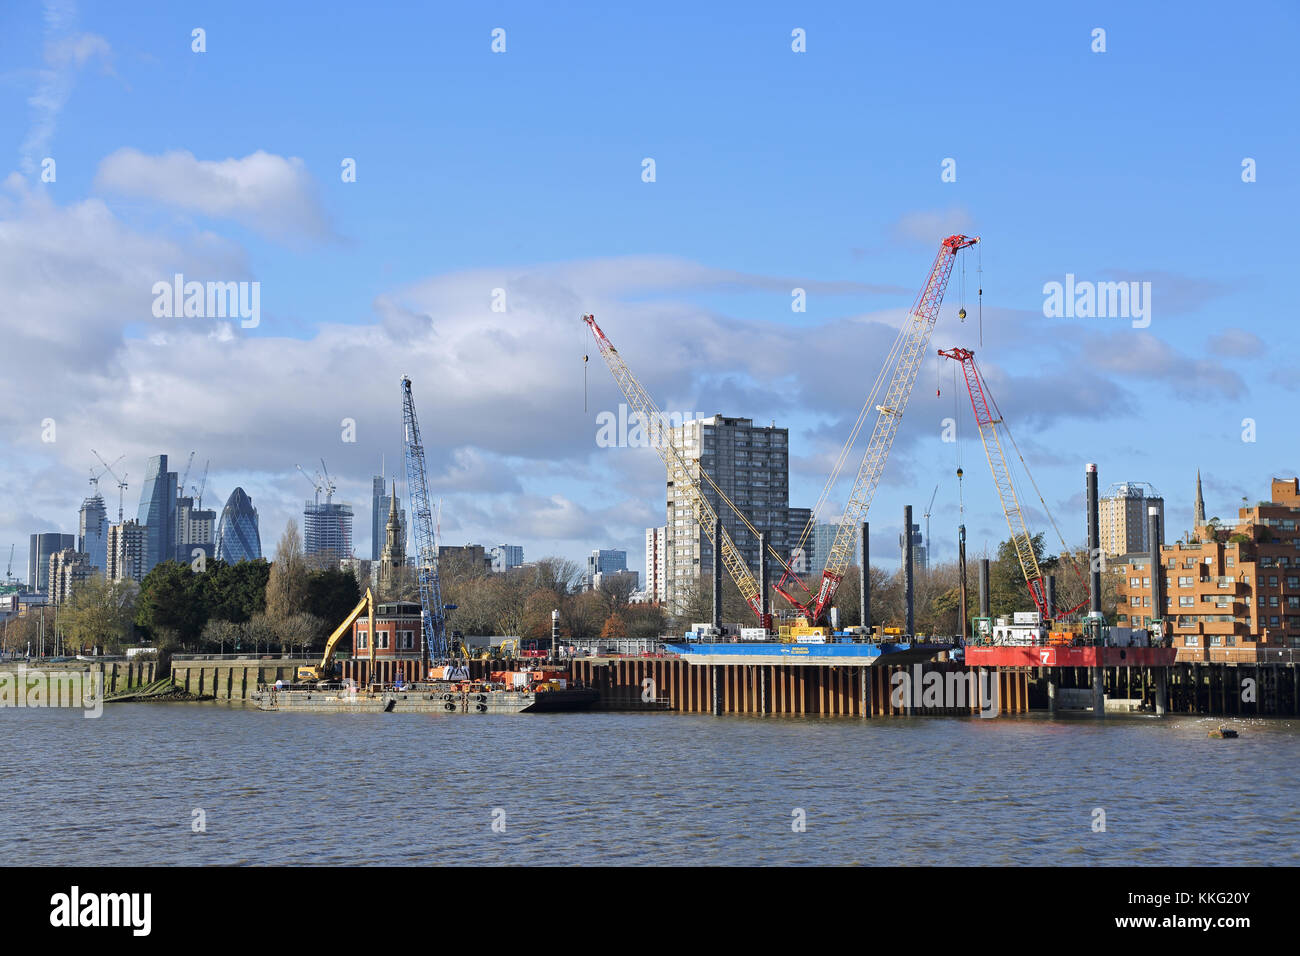 Construction of the new Thames Tideway sewer in London, UK. Jack-up barges support cranes and excavation equipment on the River Thames at Wapping. Stock Photo